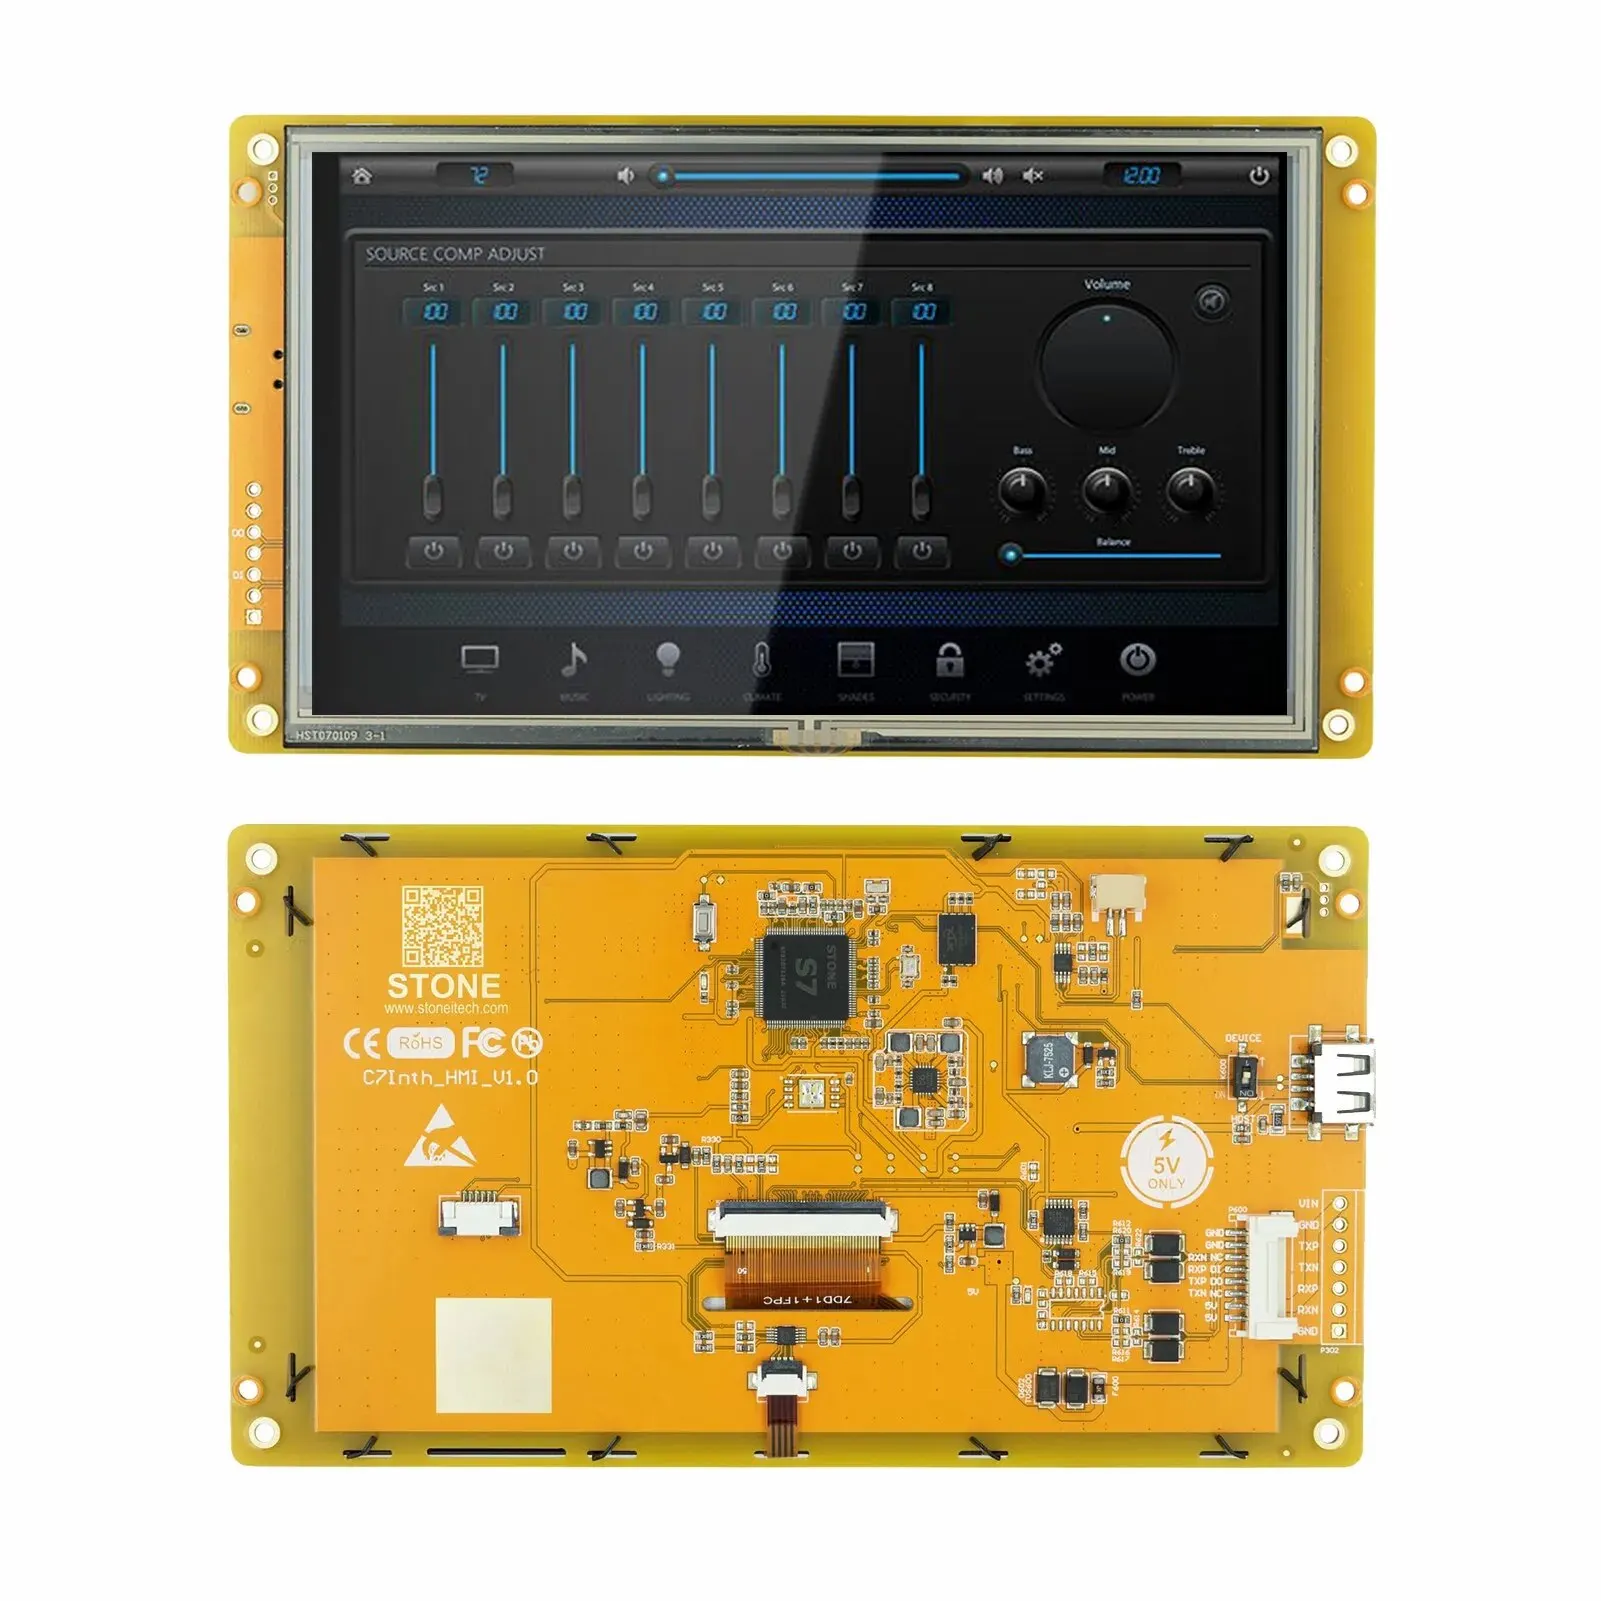 

7 inch HMI Serial LCD Display Module with Program + Touch Screen for Industrial Equipment Control STWC070LT-01